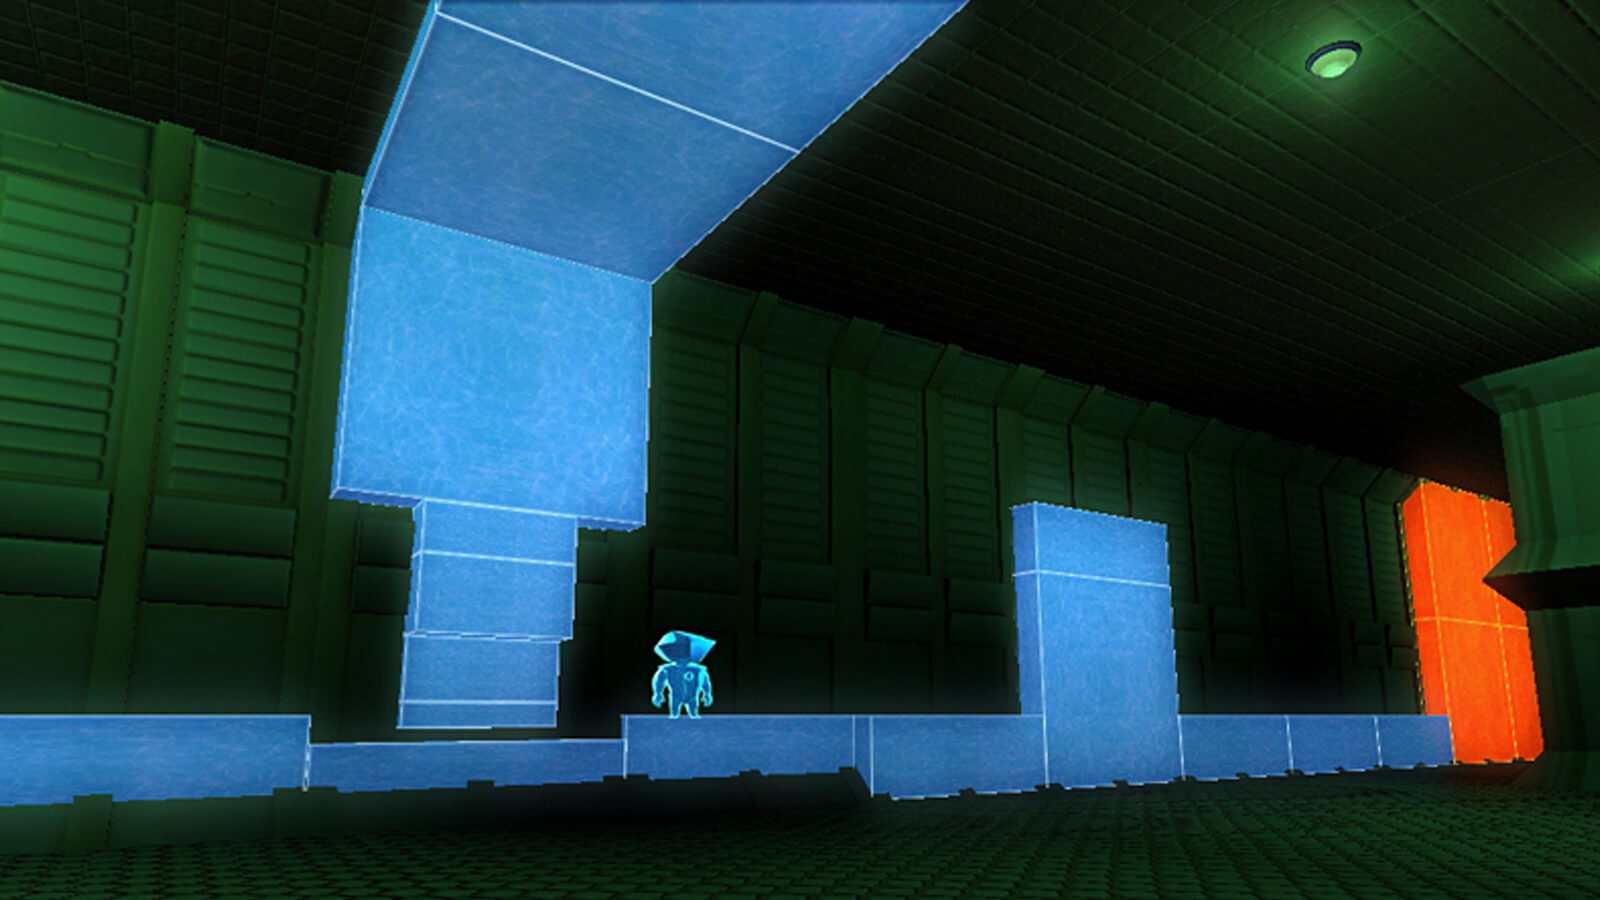 The player's avatar stands on blue blocks in a green-tinted room